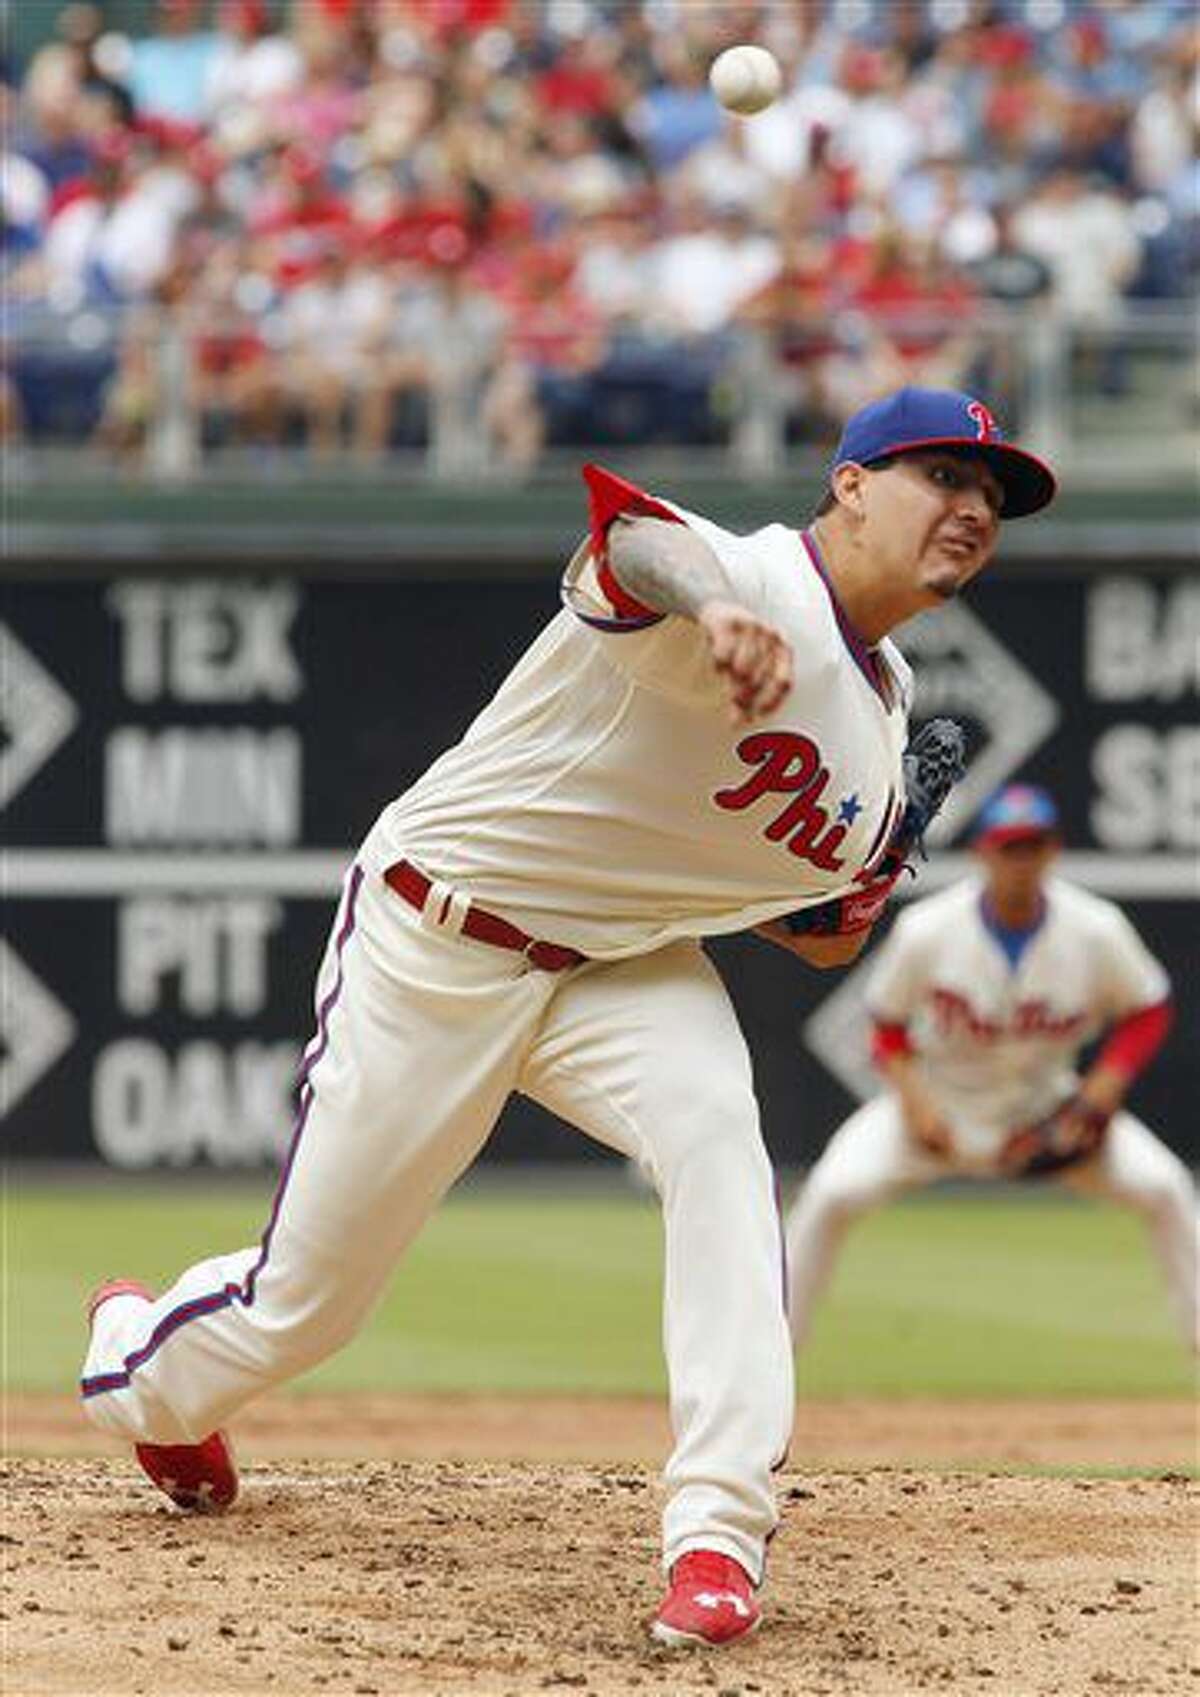 Philadelphia Phillies starting pitcher Vince Velasquez throws during the first inning of a baseball game against the Kansas City Royals, Sunday, July 3, 2016, in Philadelphia. (AP Photo/Tom Mihalek)